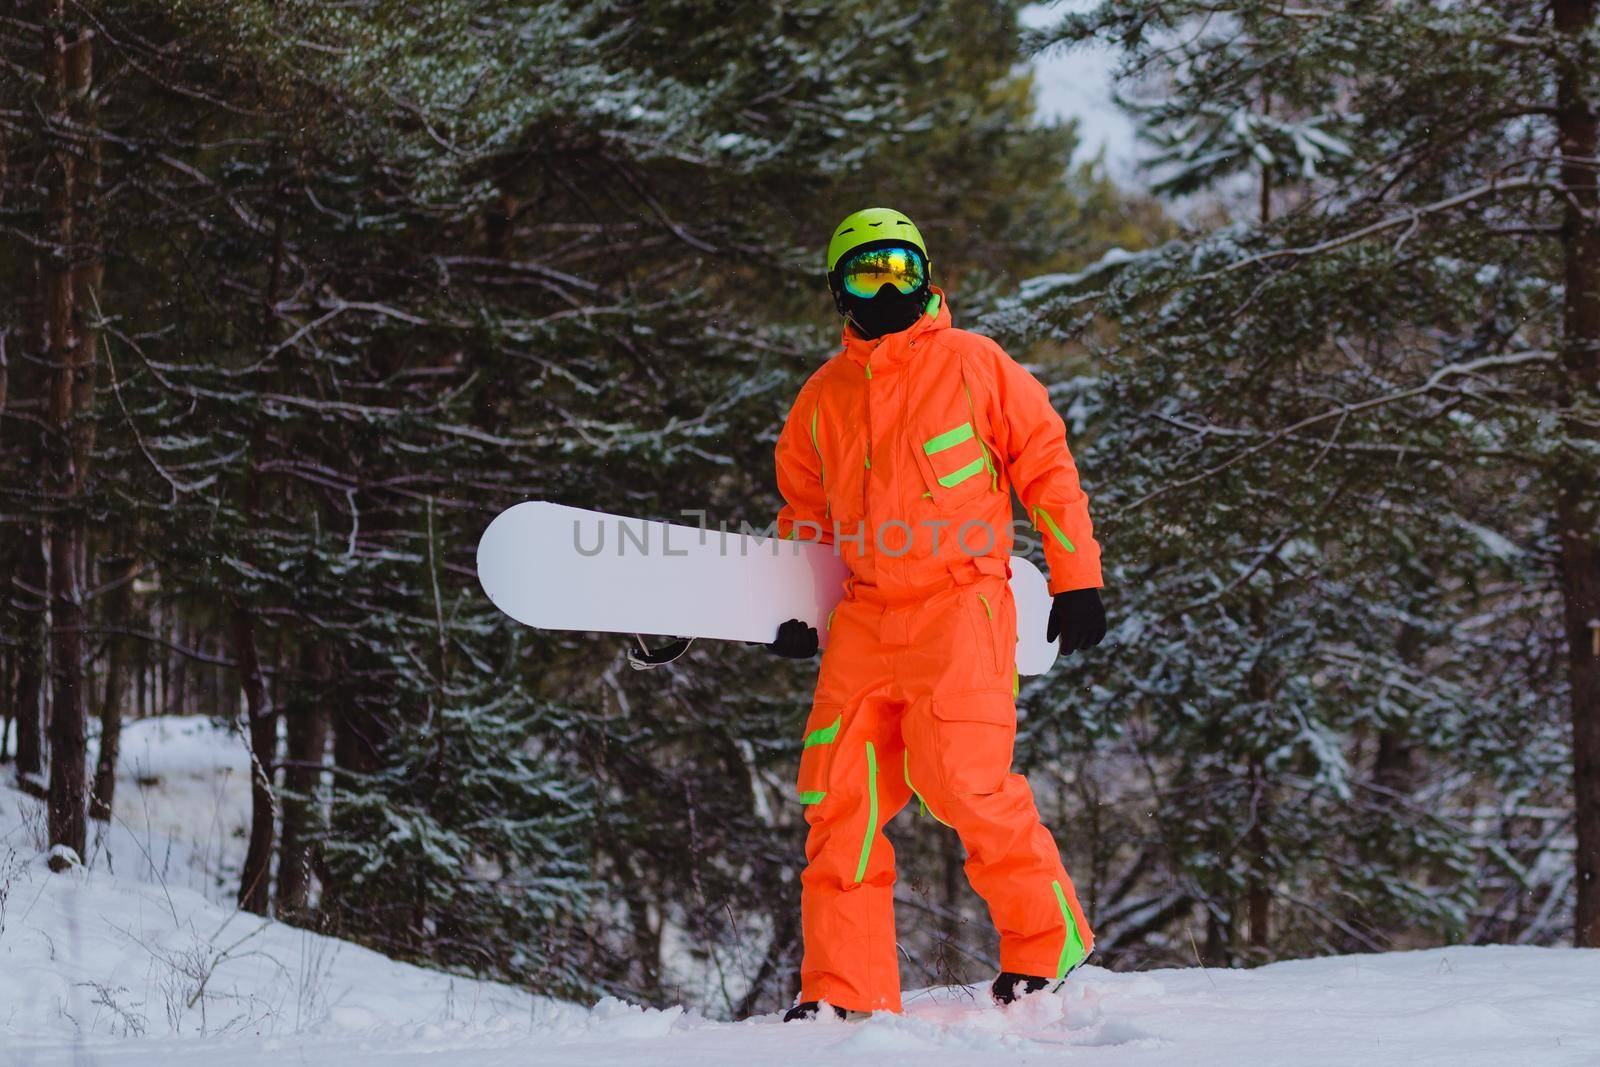 Snowboarder dressed in orange suit walking through the forest